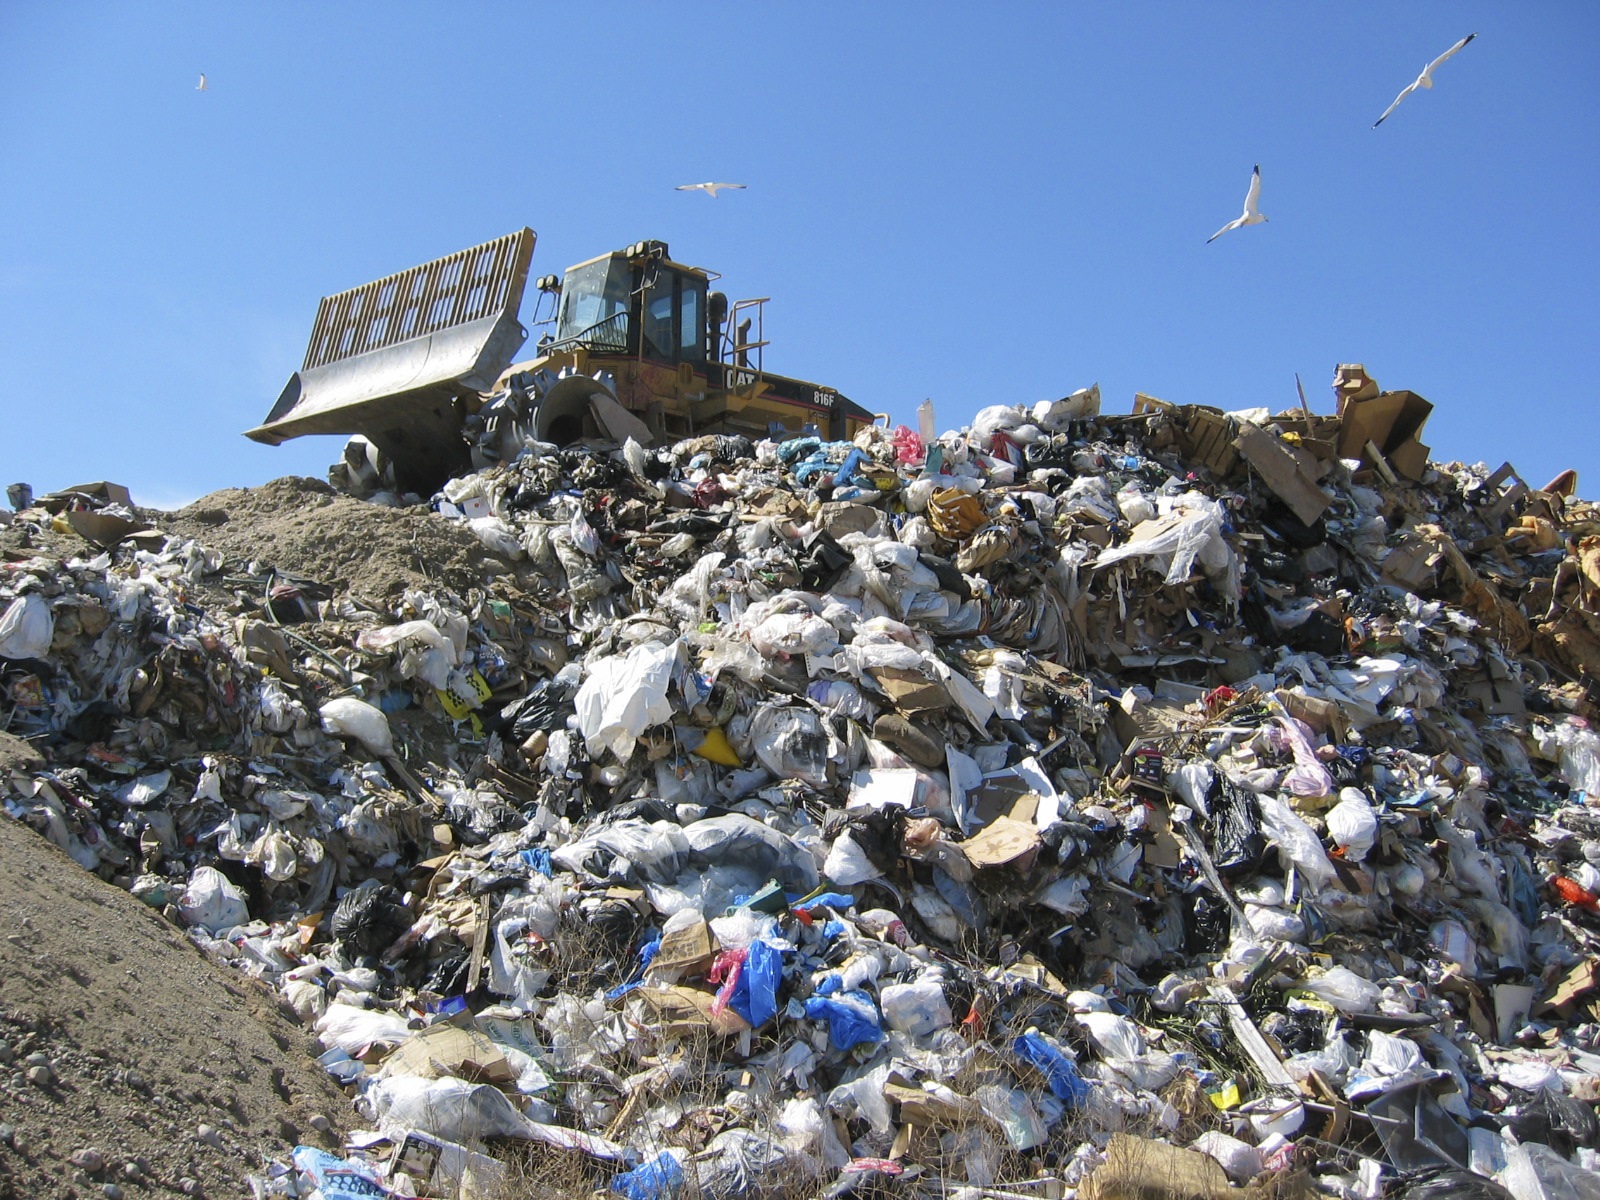 "Despite making up less than 4% of the population, Americans produce over 20% of the garbage in the world."